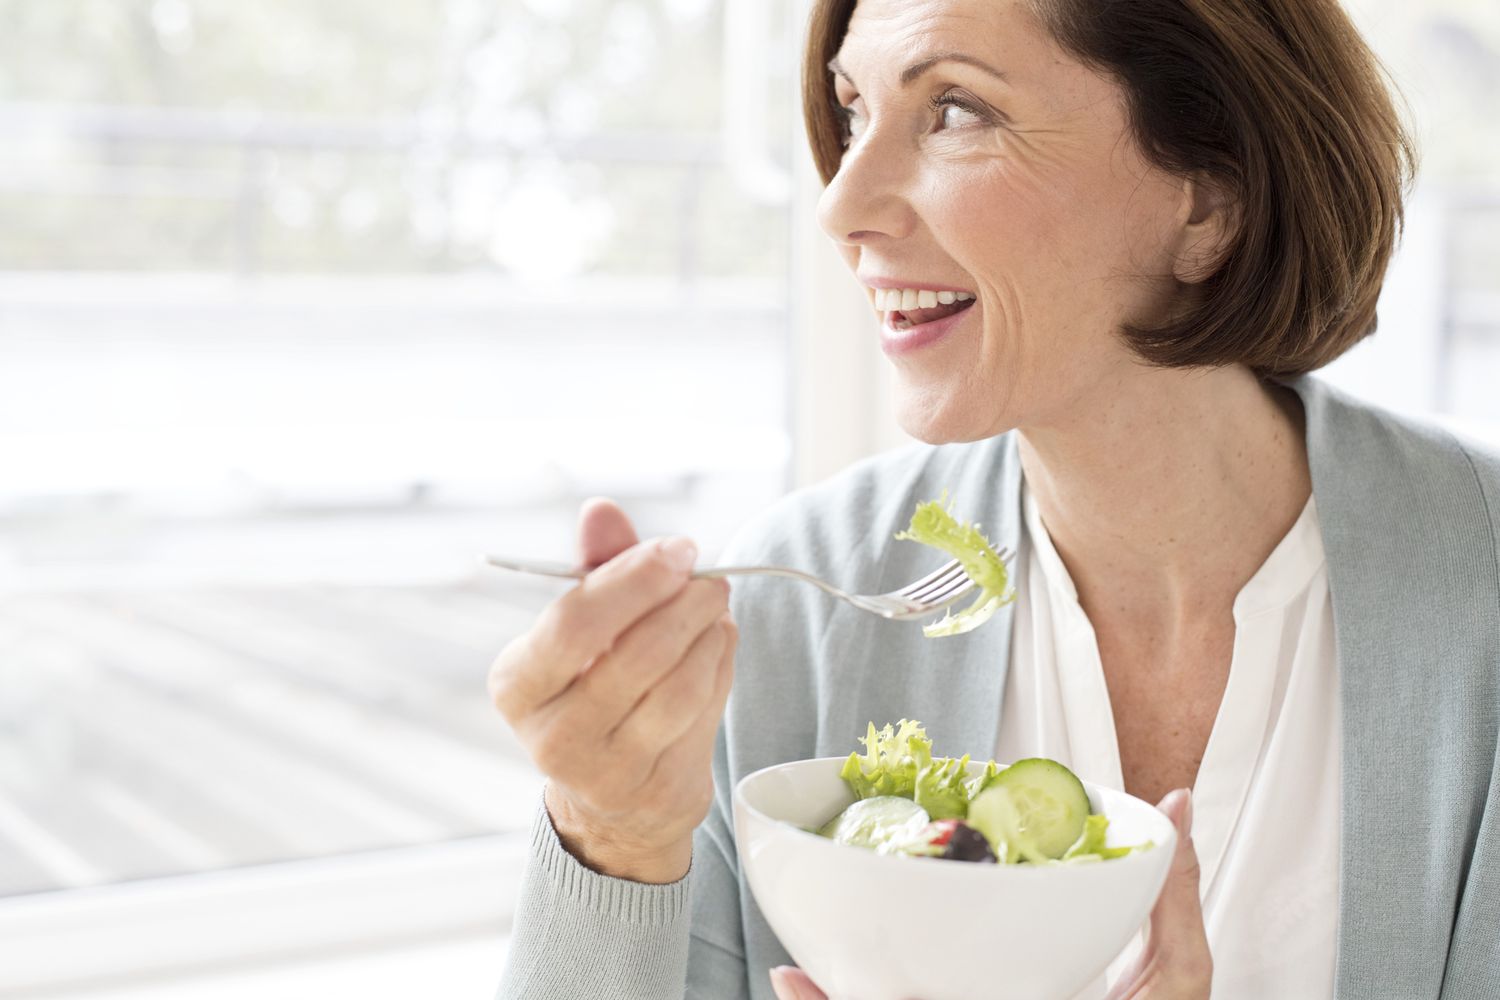 Woman eating a salad, looking out the window